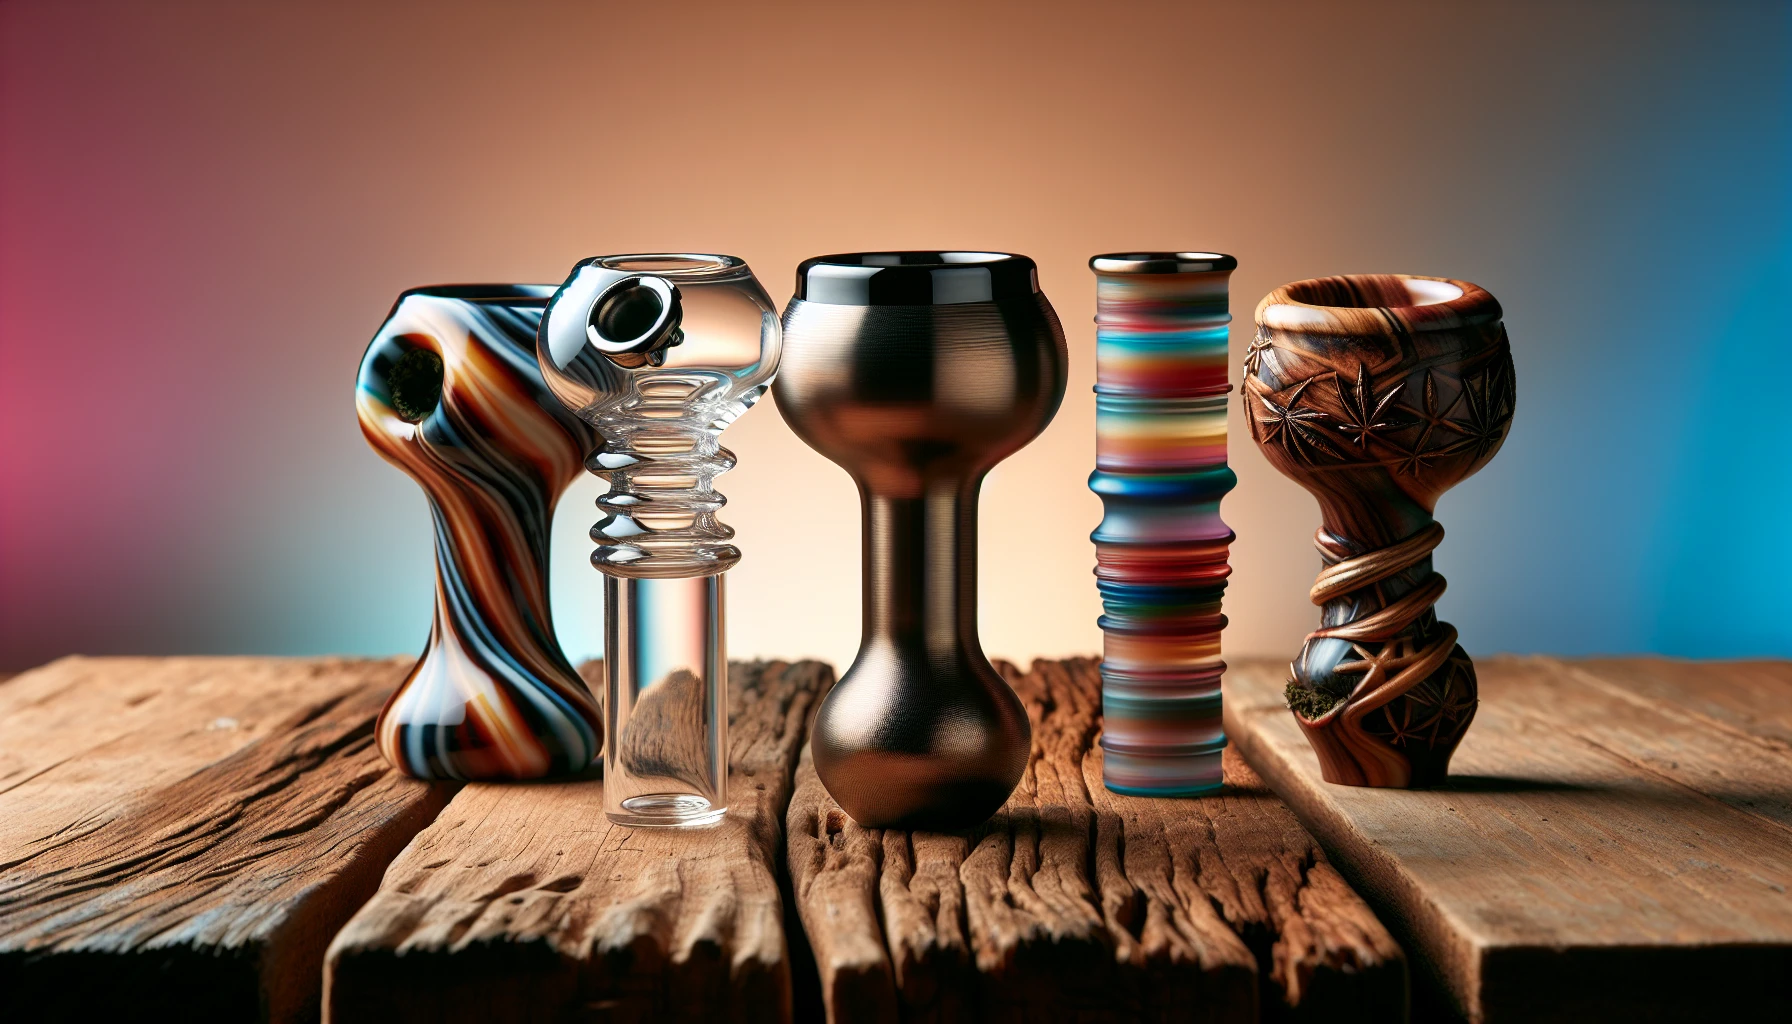 Comparison of glass, metal, silicone, and wood weed bowls